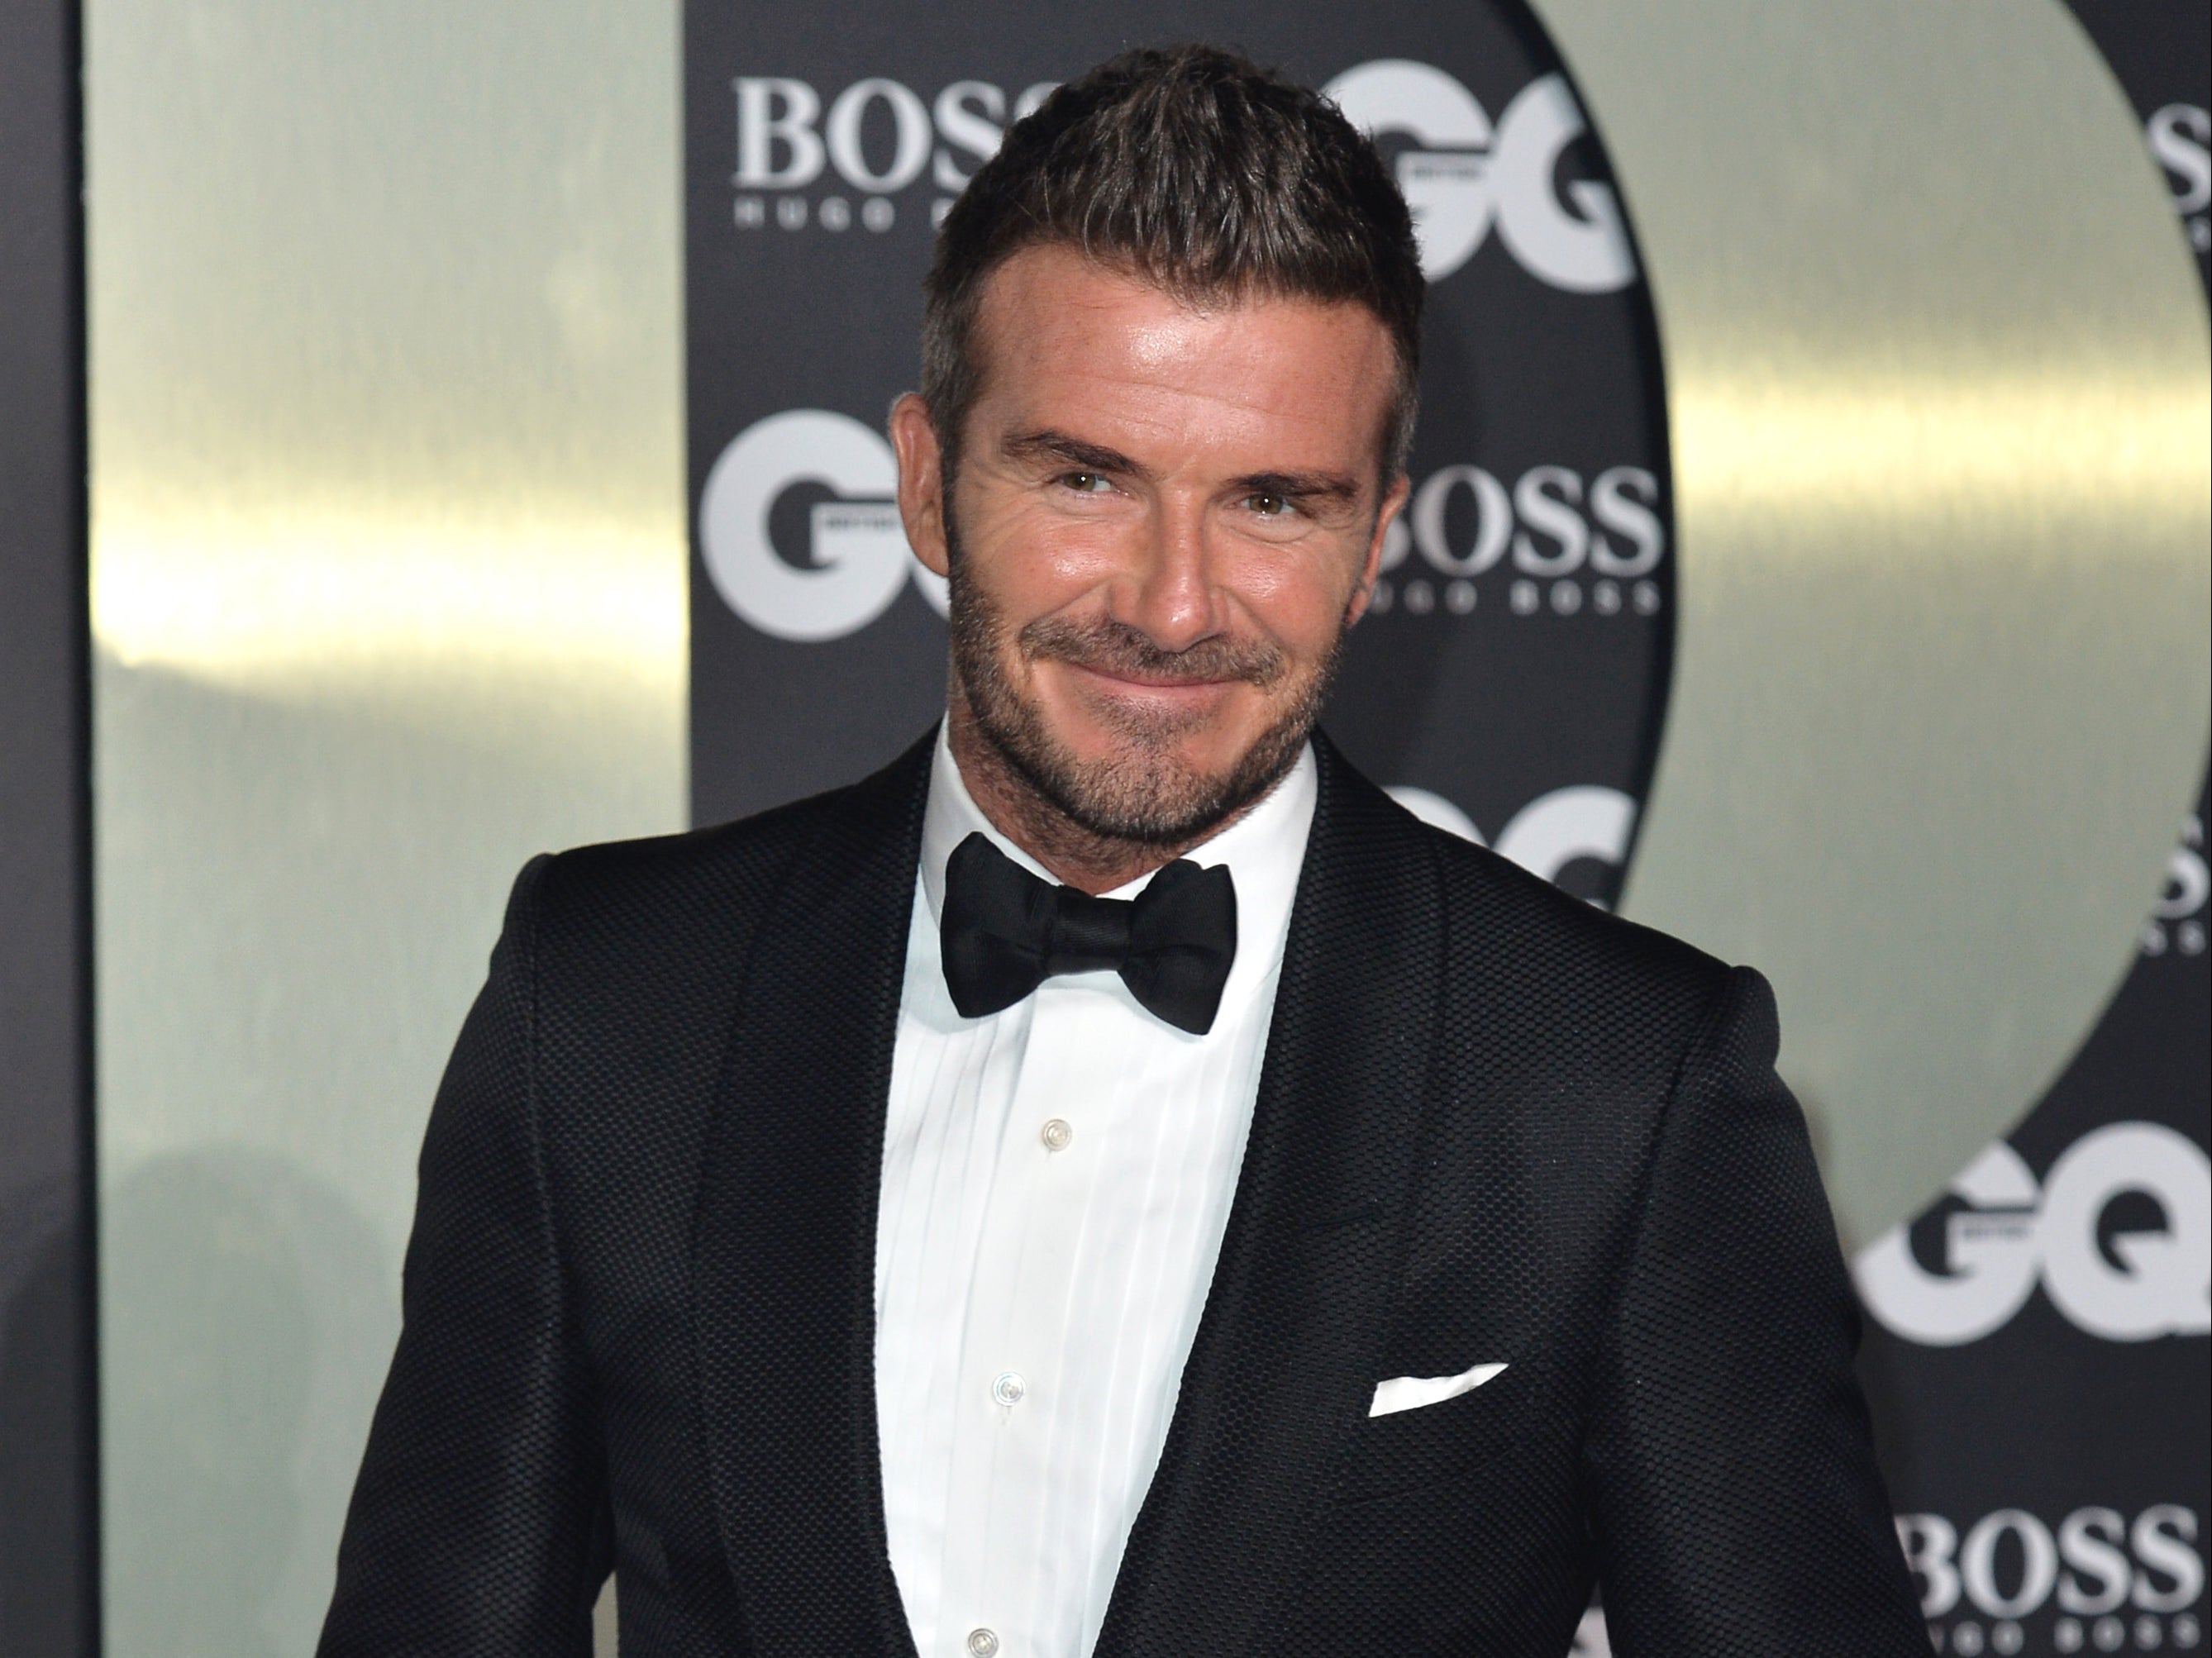 David Beckham sends flowers to Vanessa Bryant and family on Valentine’s Day